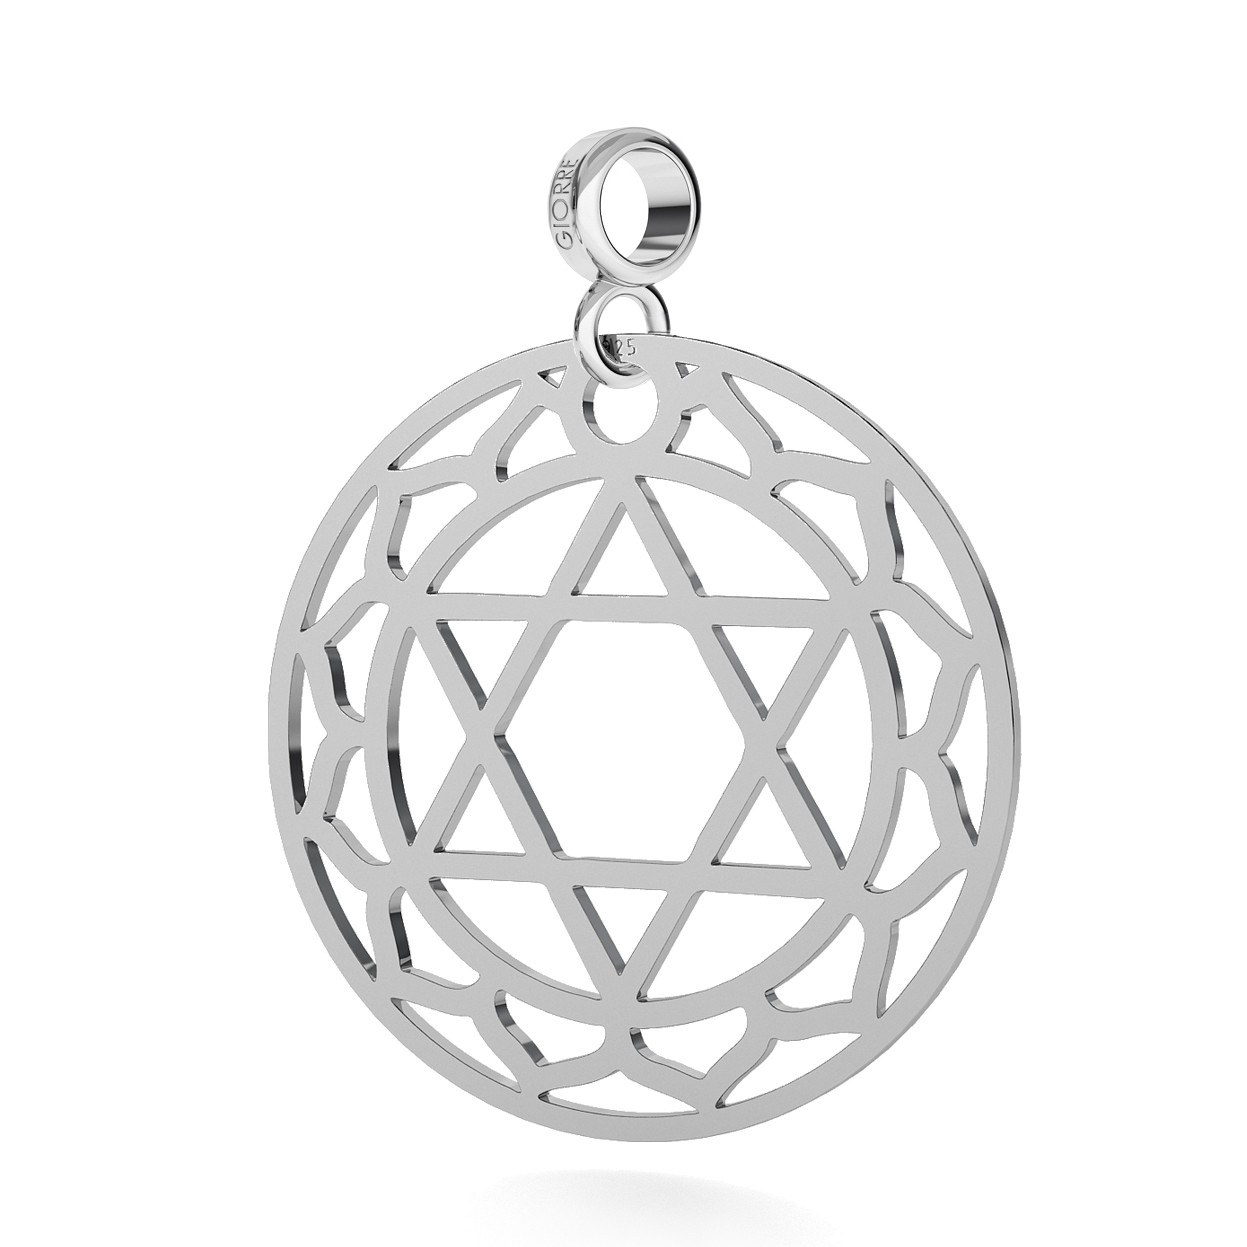 CHARM 71, HEART CHAKRA, STERLING SILVER (925) RHODIUM OR GOLD PLATED